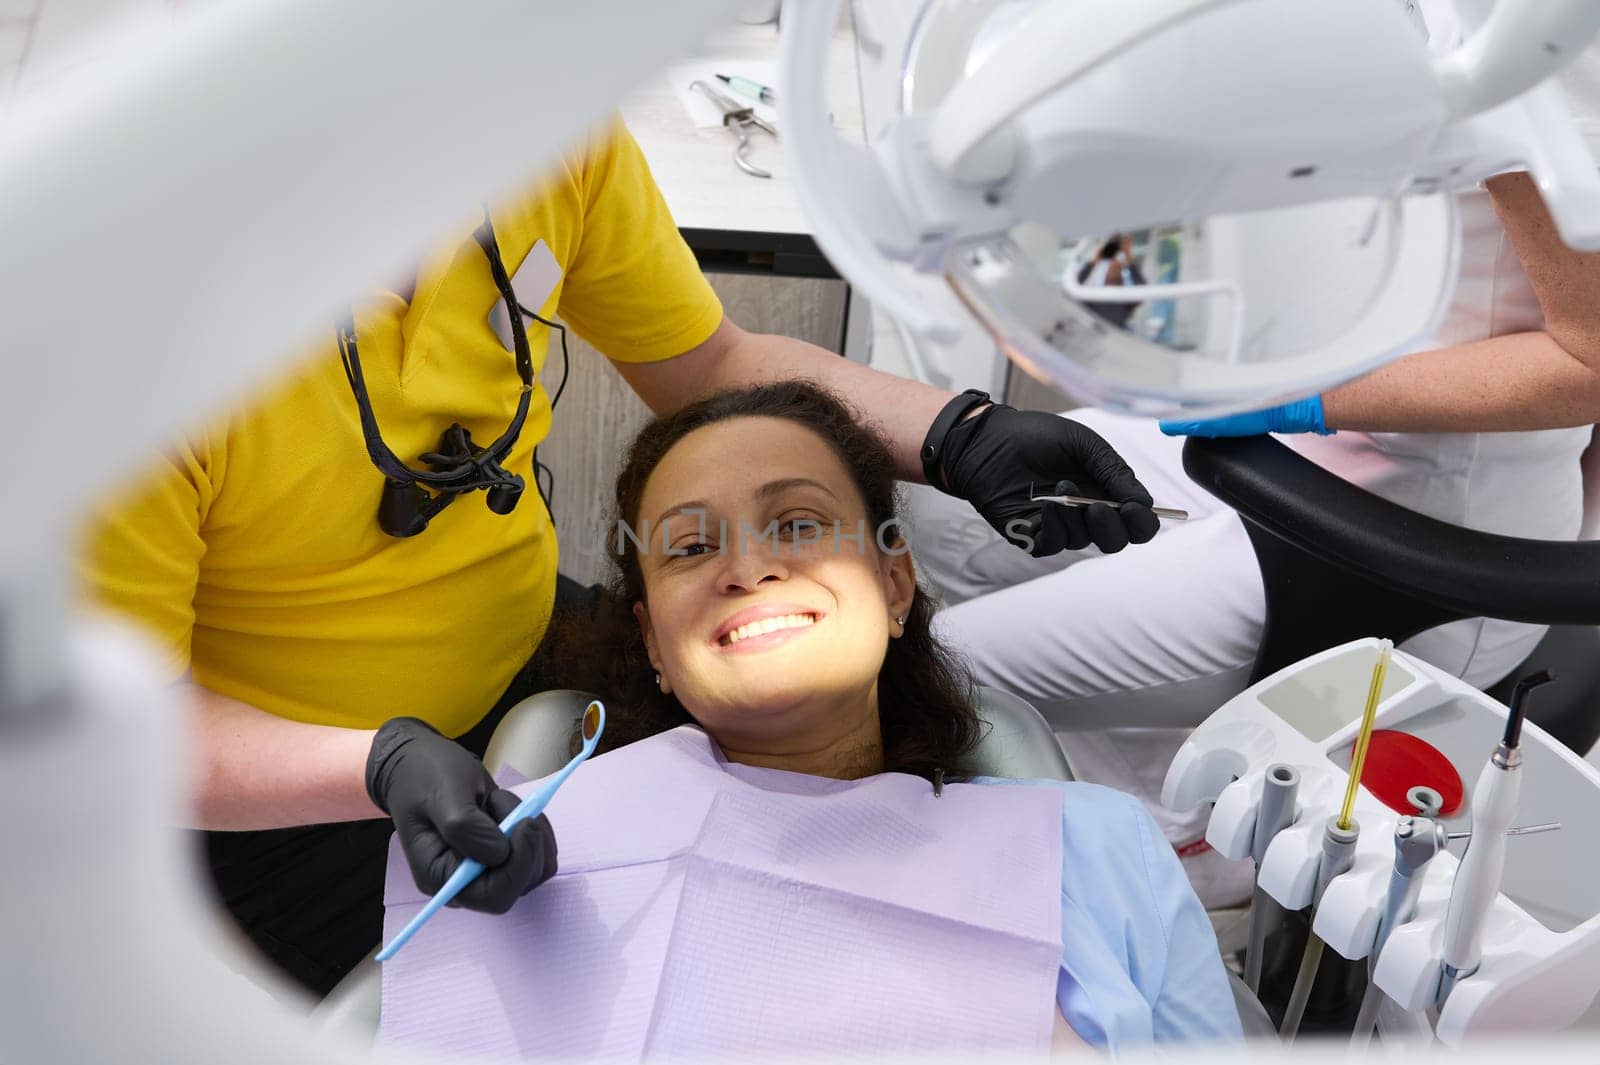 Close-up portrait of a smiling young pregnant woman in dentist's chair getting a dental consultation in dentistry clinic. Pregnancy. Dental health and oral cavity care concept. Doctor treats teeth.